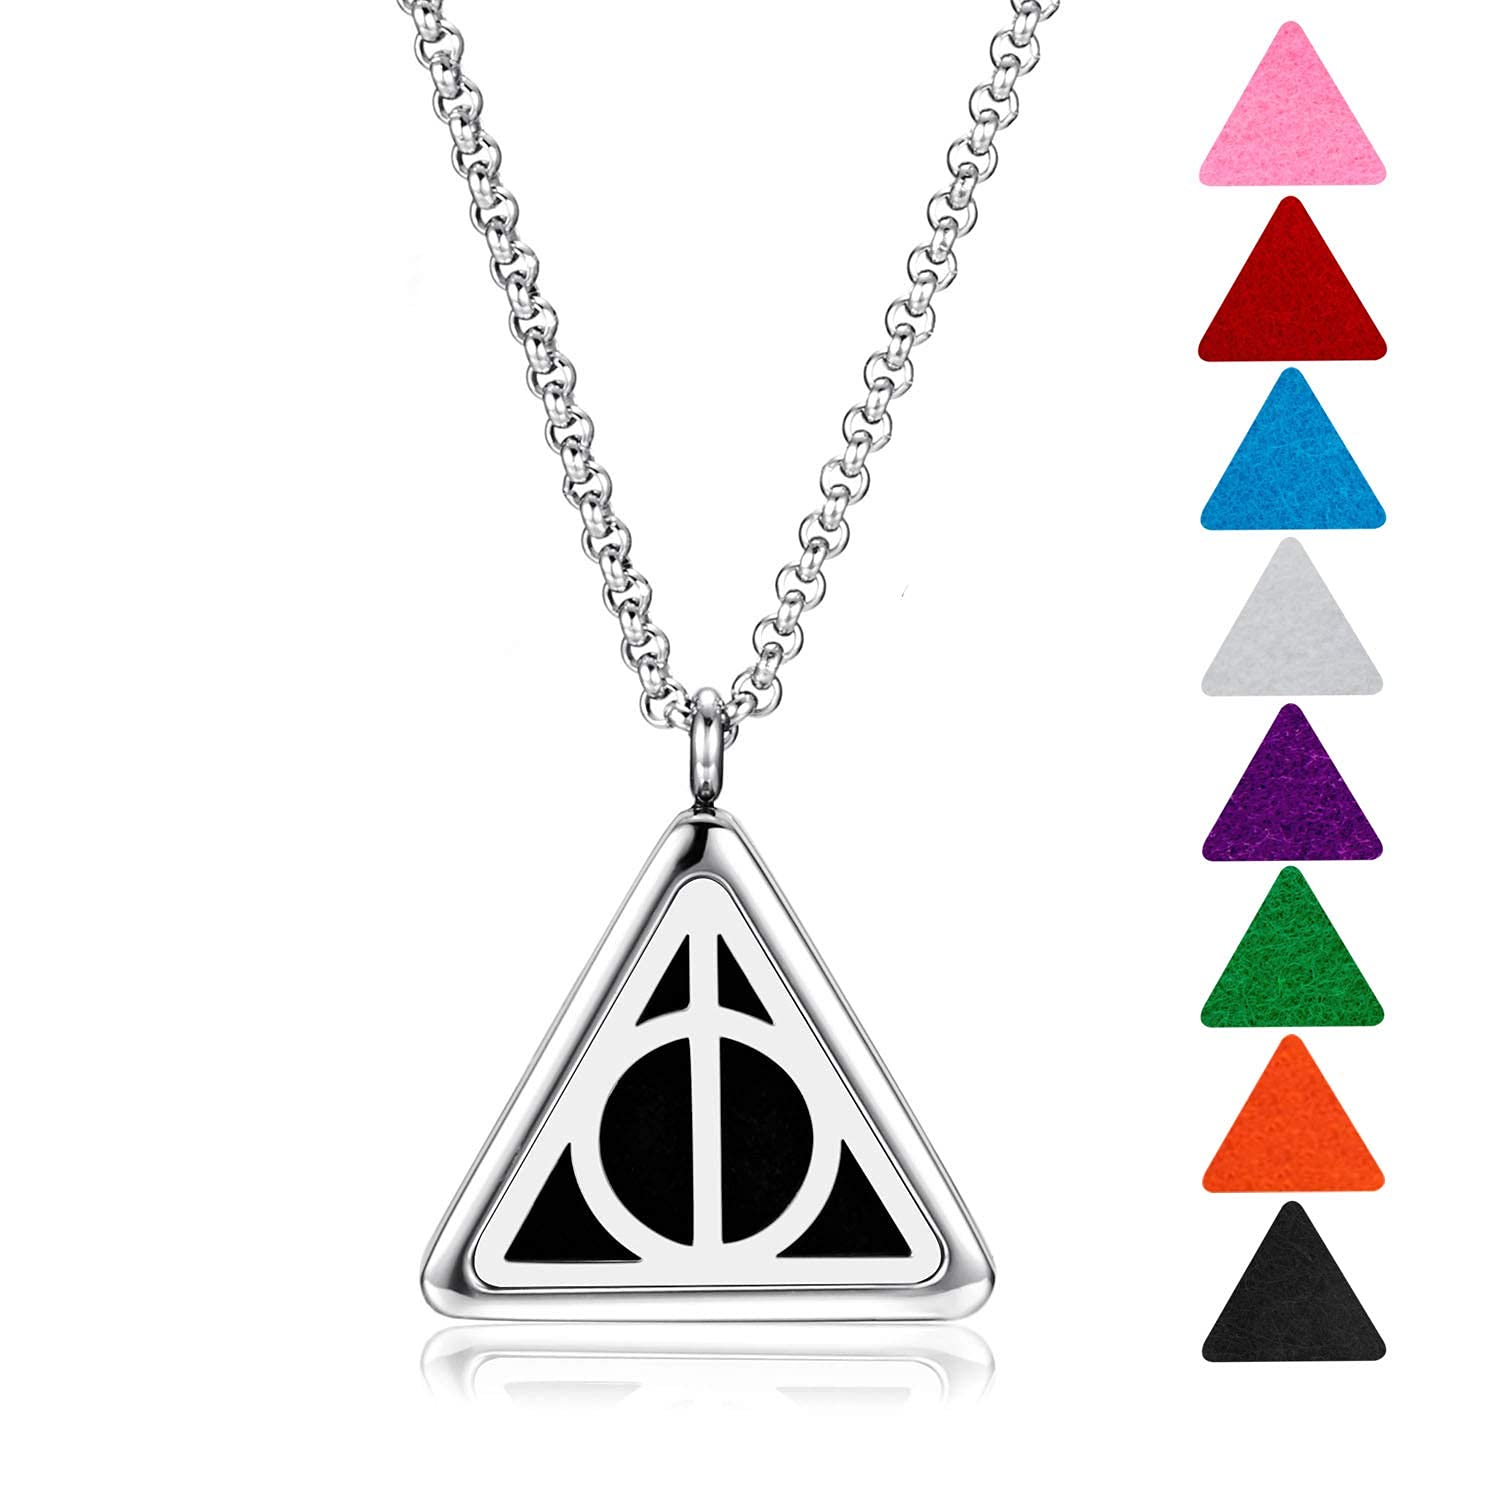 Wild Essentials Potter Hallows Necklace Aromatherapy Diffuser Pendant, 24